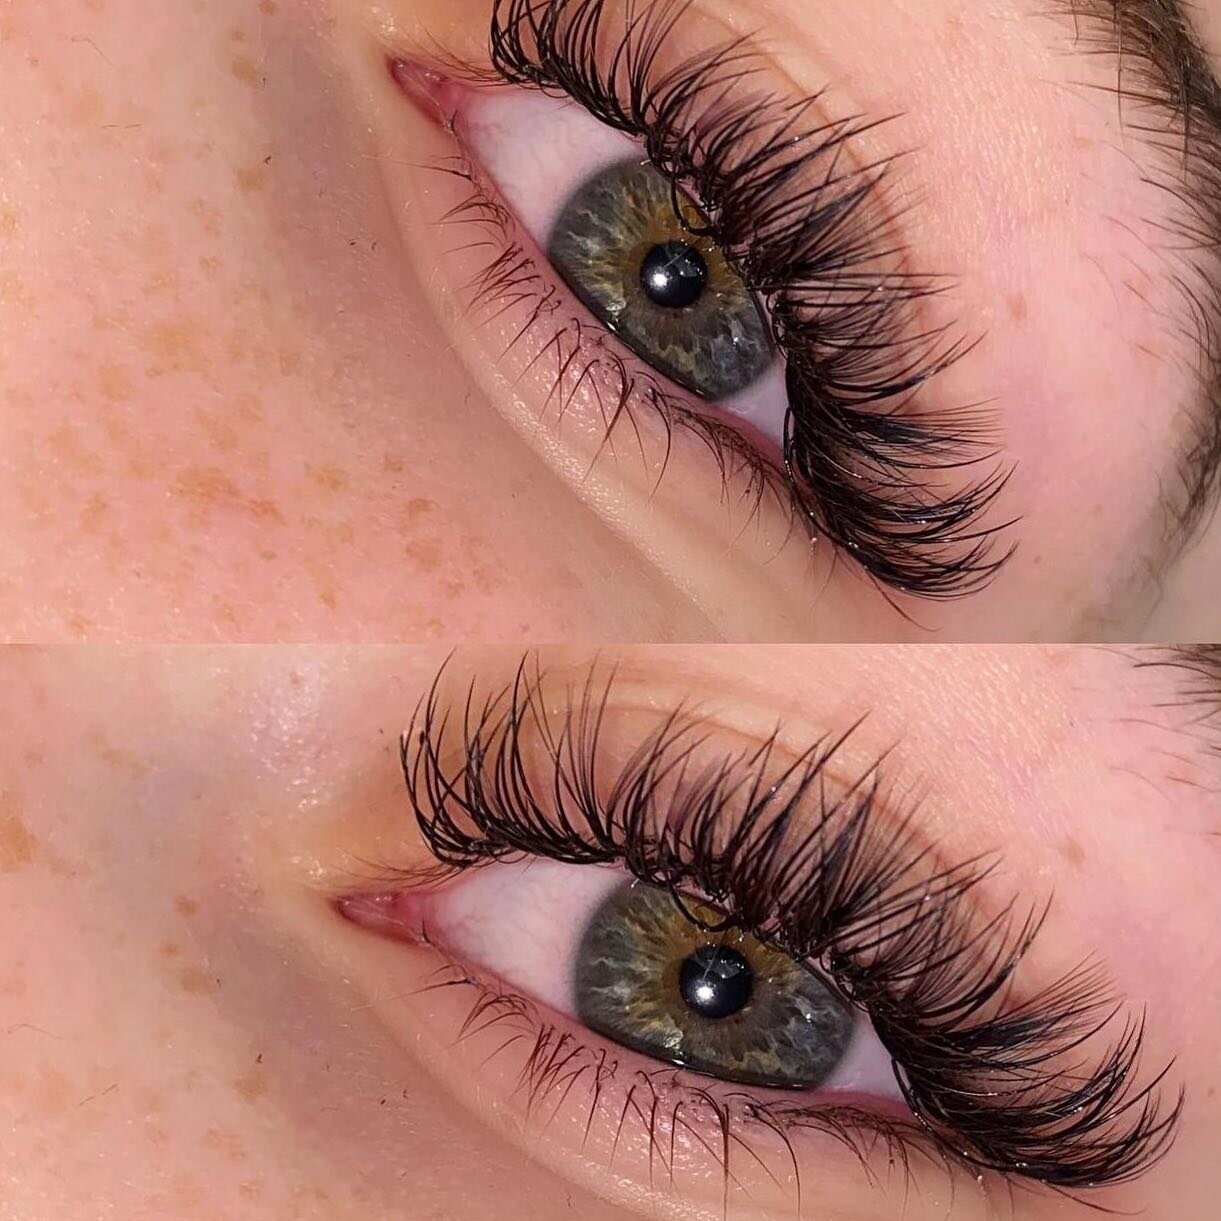 Beaut lashes by @del_ti_x 💖🤩 For appointments with Mari head to her page to use her booking system! Specialising in lashes &amp; beauty treatments #caernarfonsalon #lashartist #oneahairandbeauty